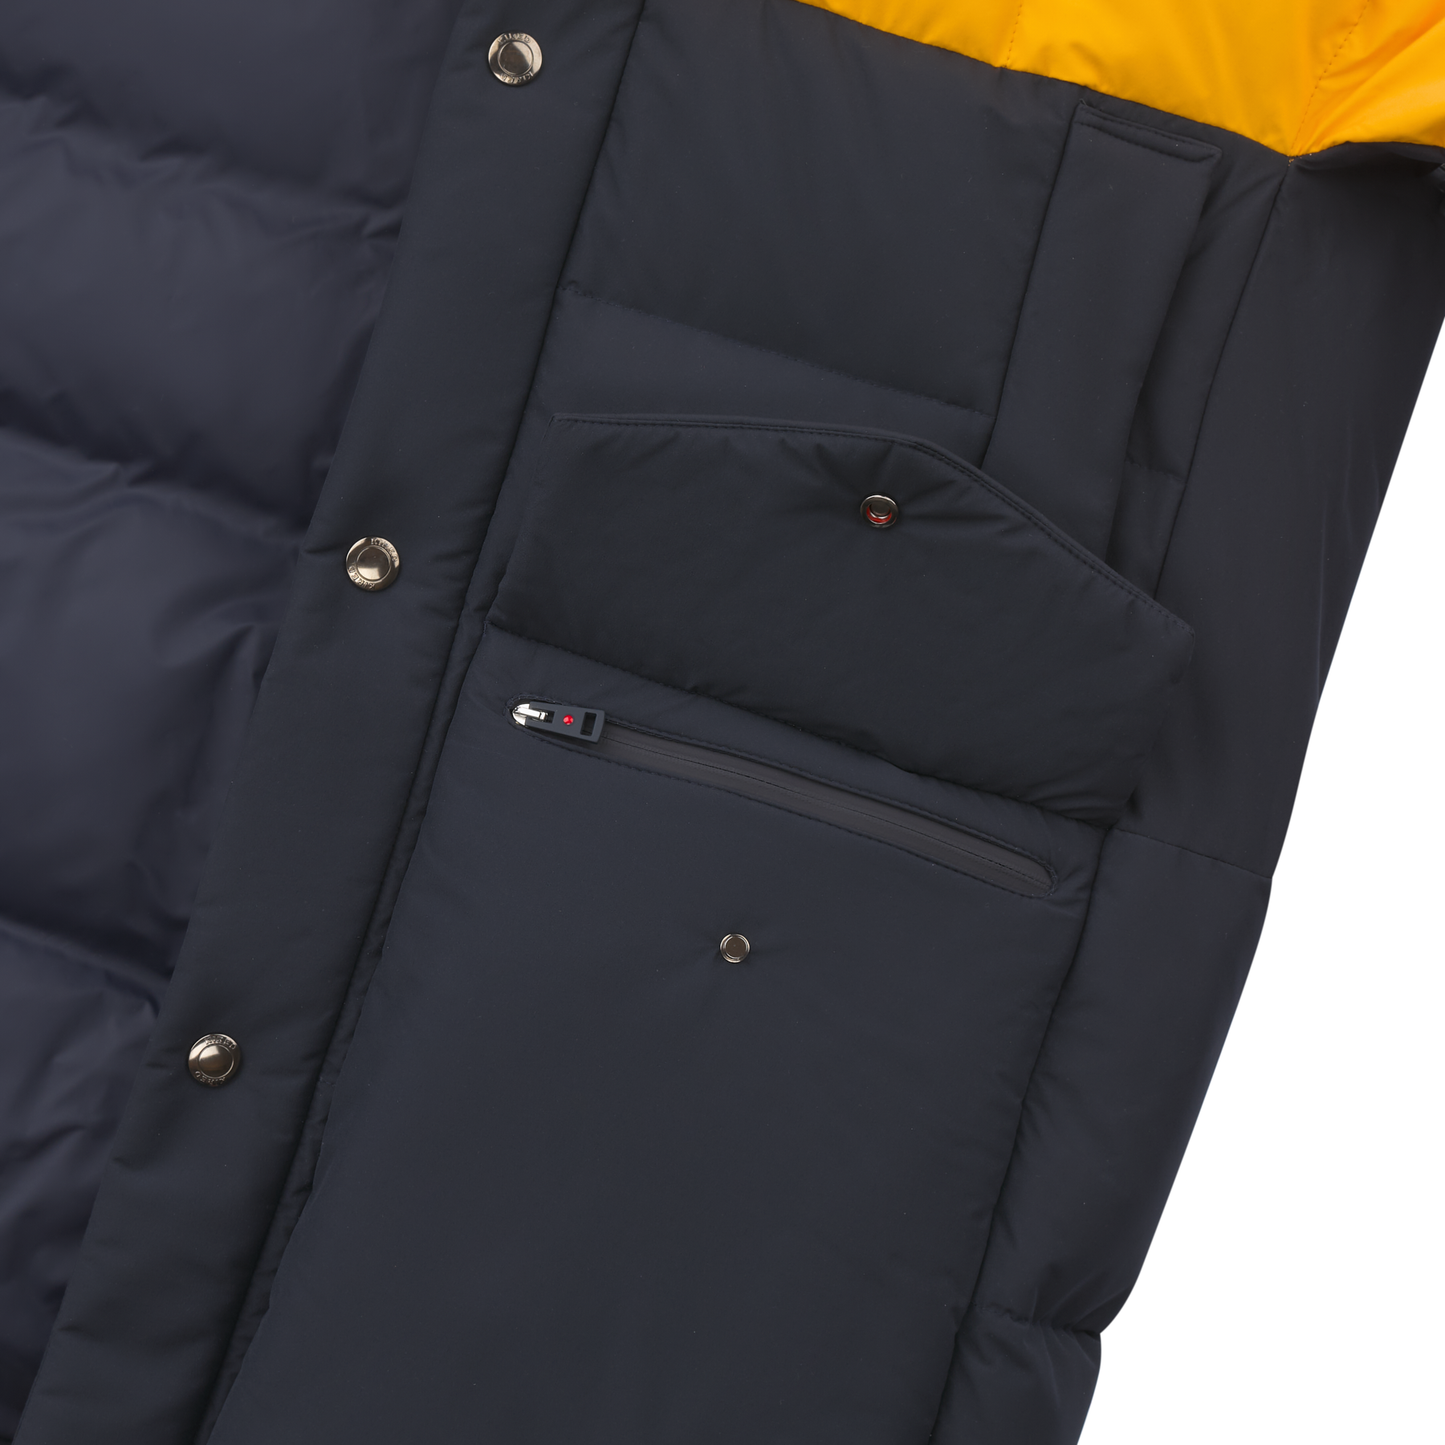 Kired Quilted Shell Hooded Down Jacket in Yellow and Dark Blue - SARTALE